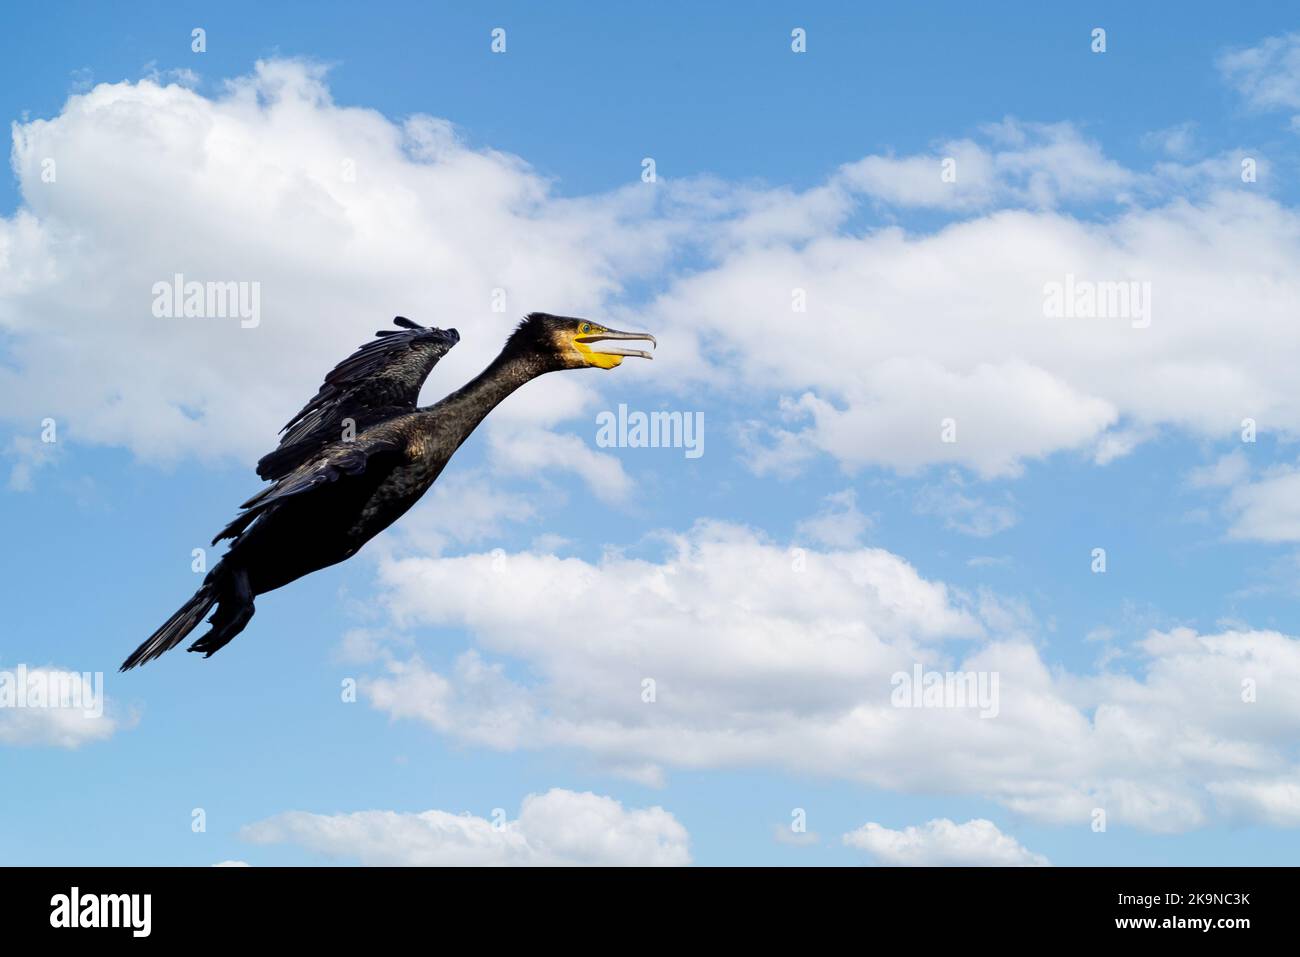 Close up of Cormorant coming into land with wings braced and beak open against blue sky with white clouds Stock Photo